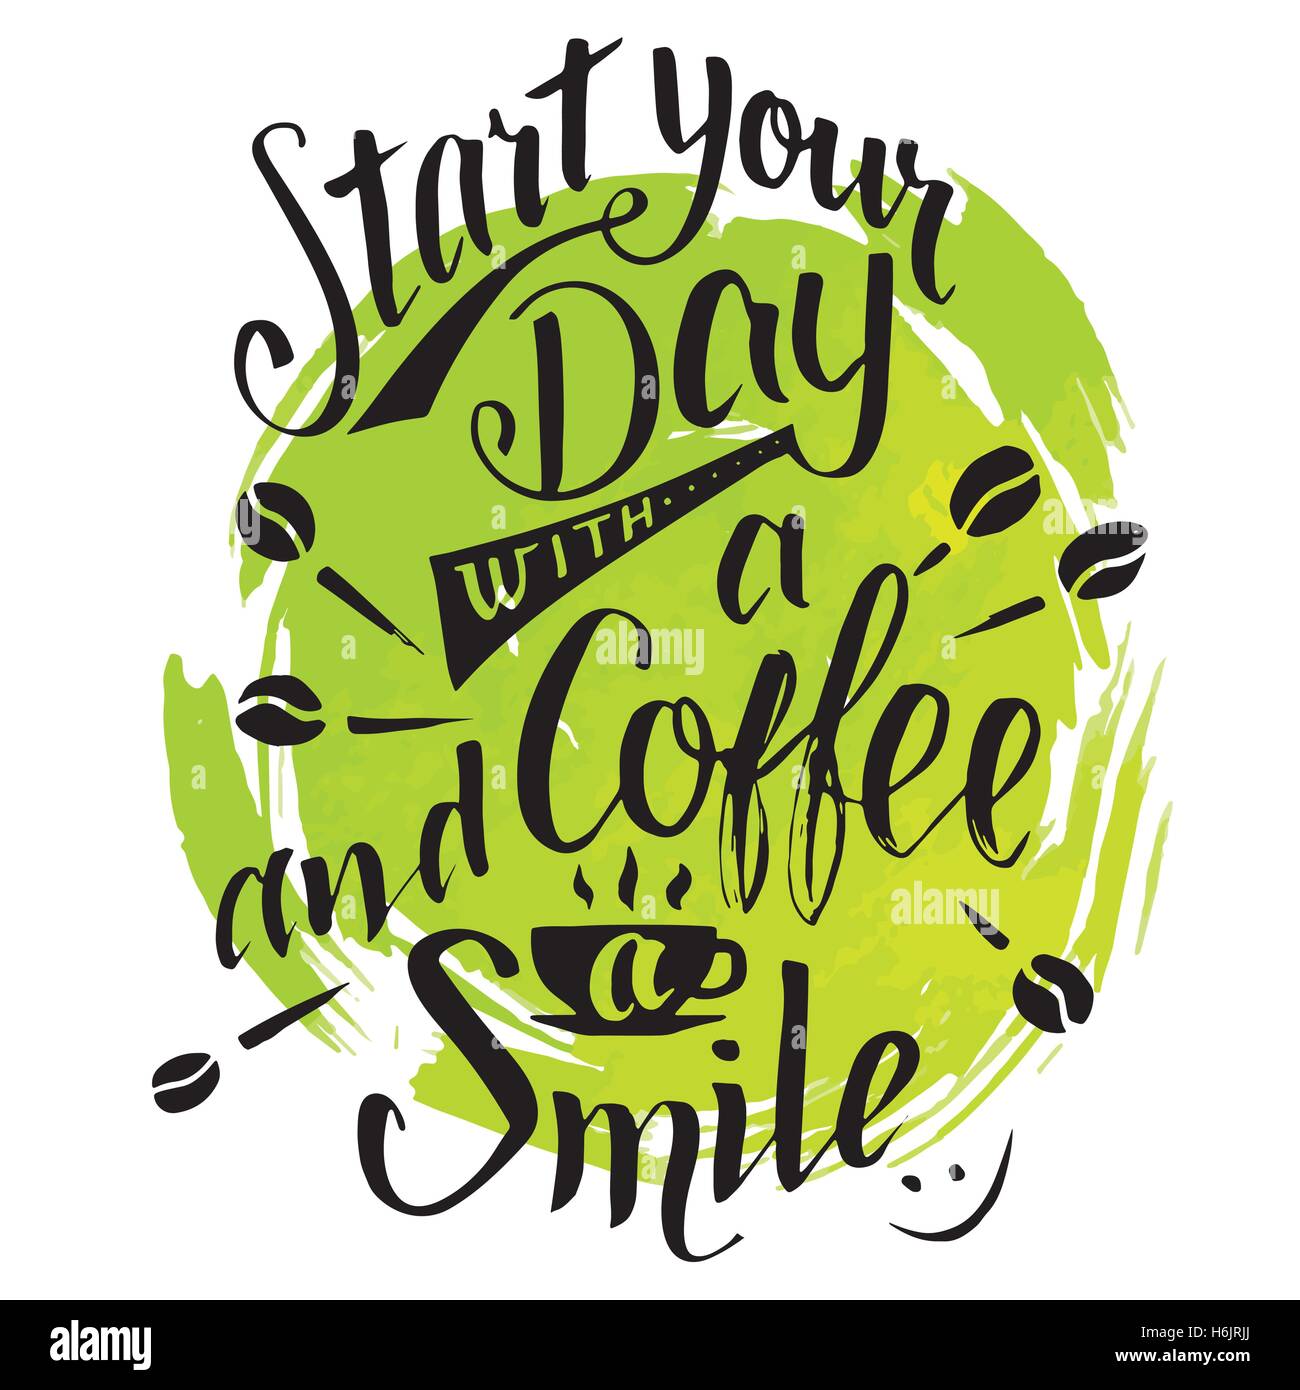 Start your day with a coffee and smile. Modern calligraphy motivational ...